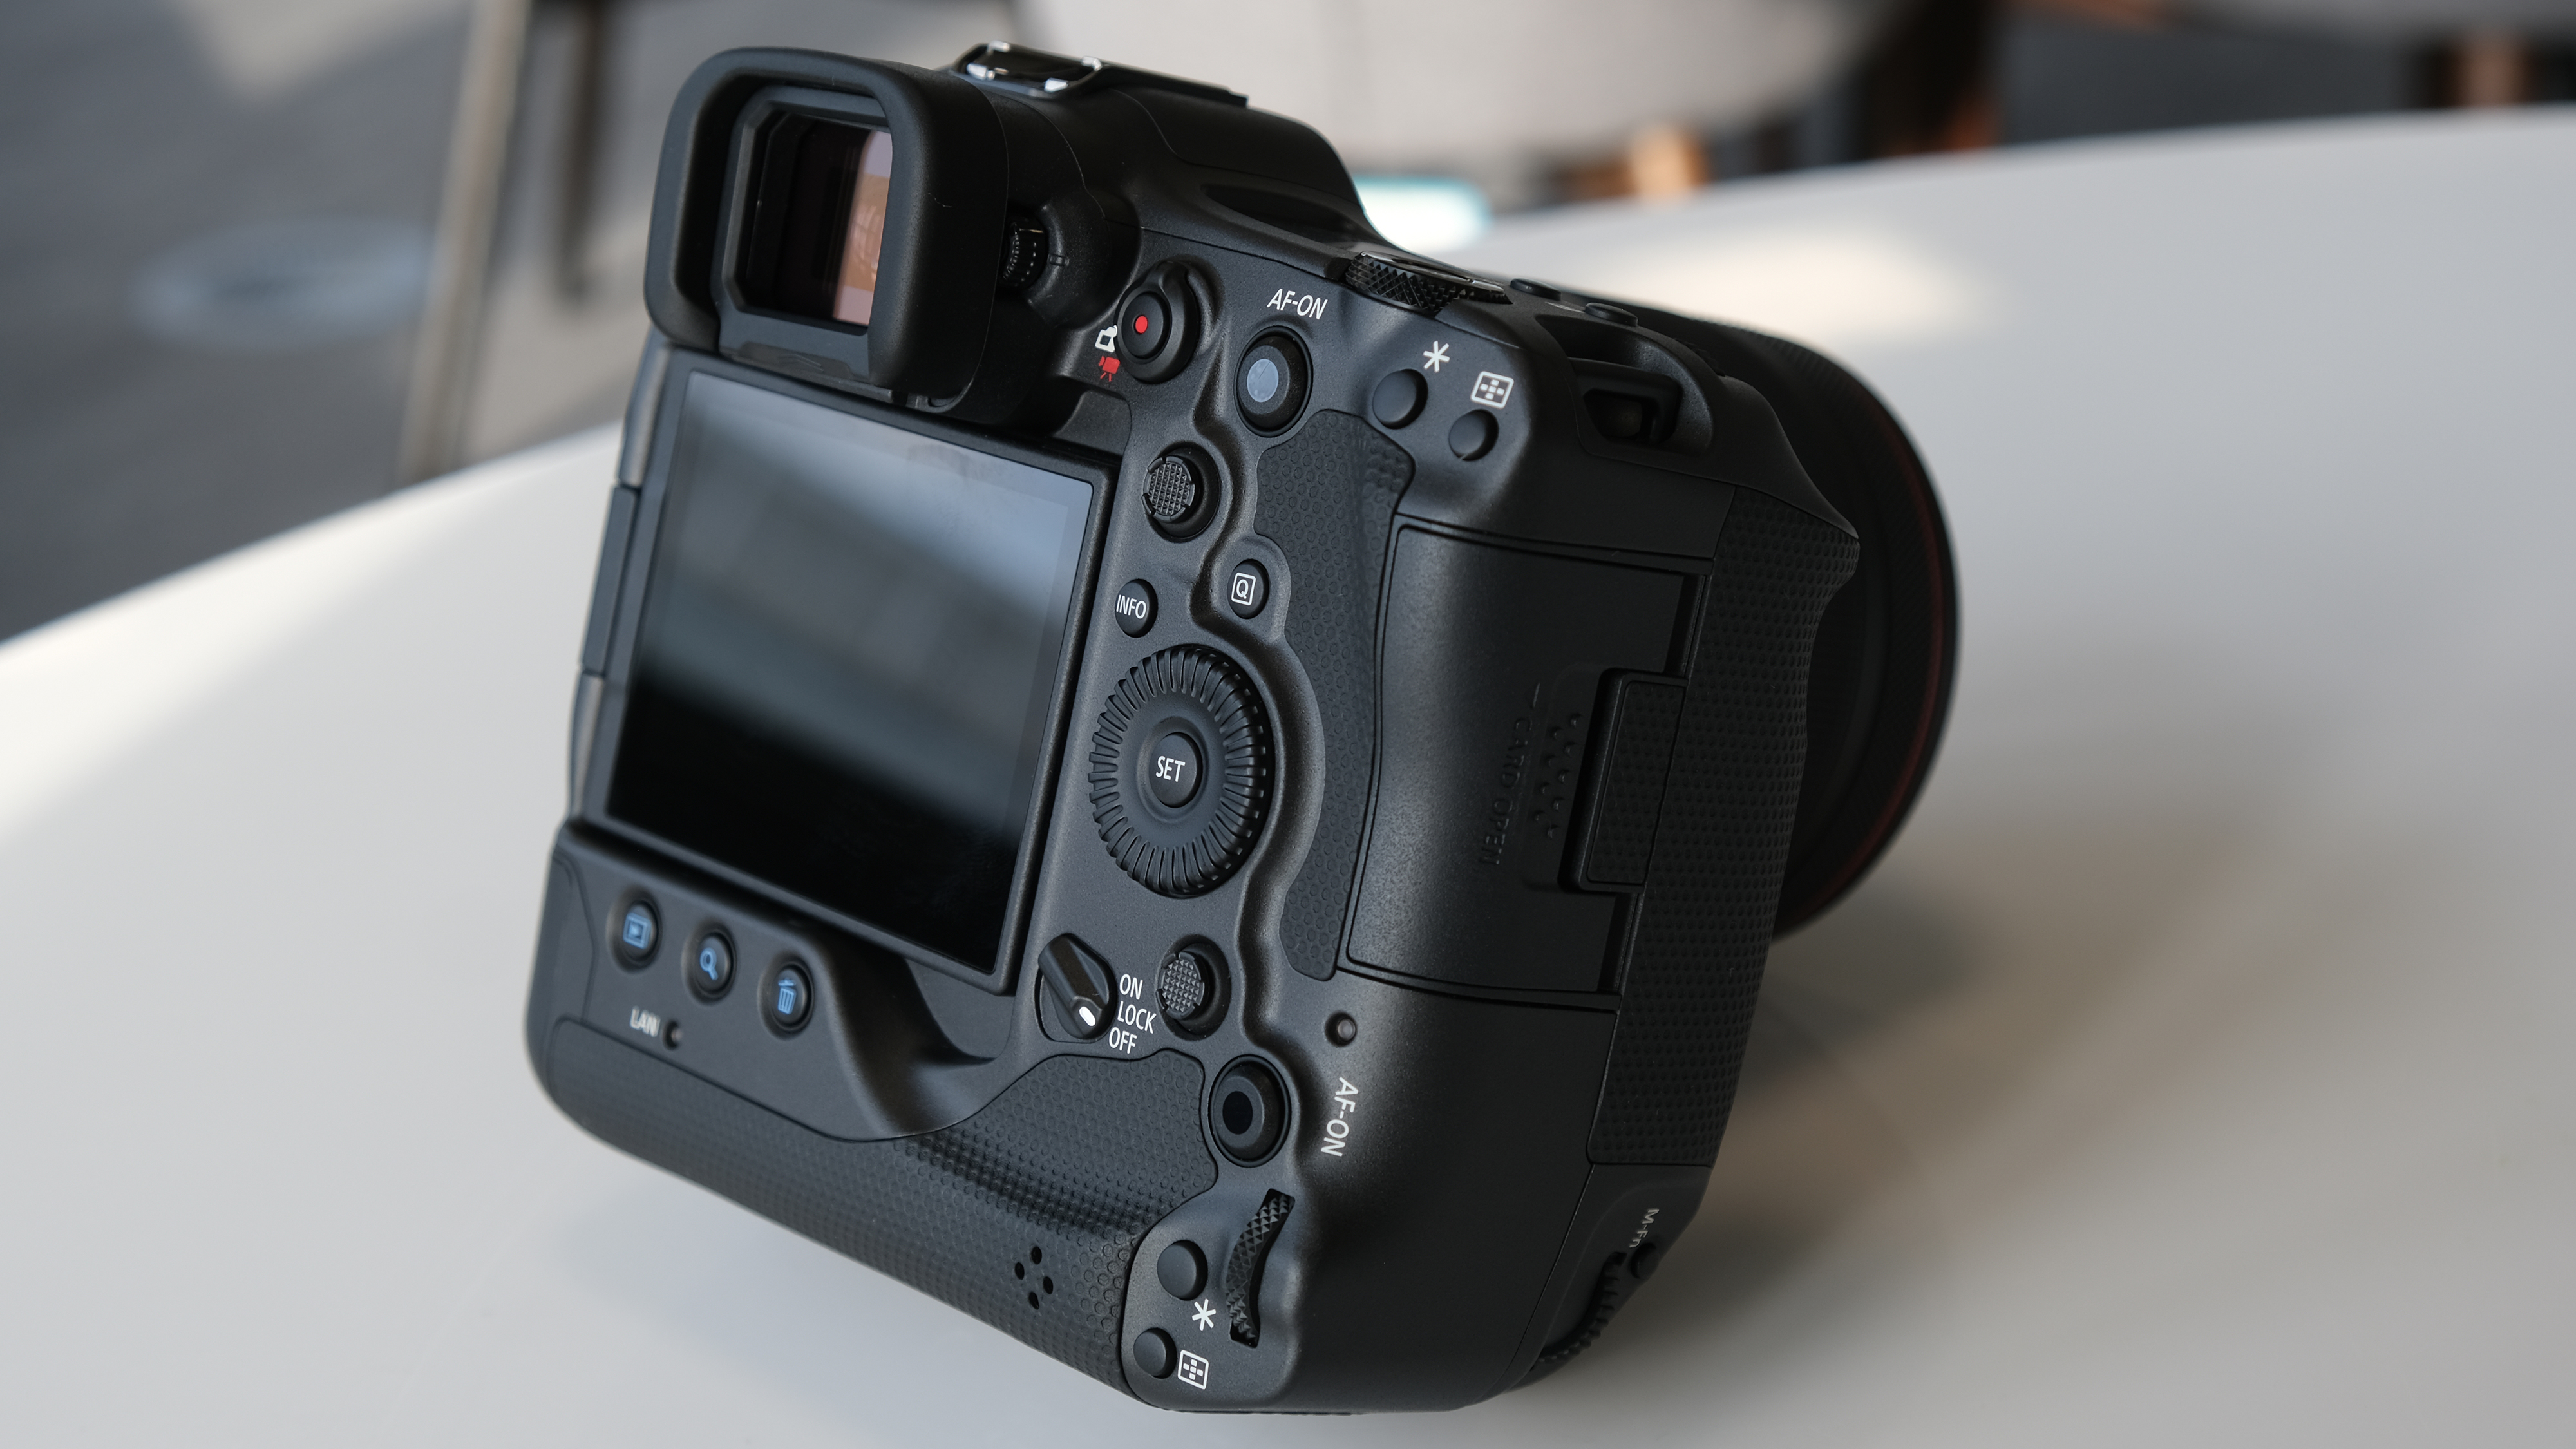 The back of the Canon EOS R3 mirrorless camera on a table